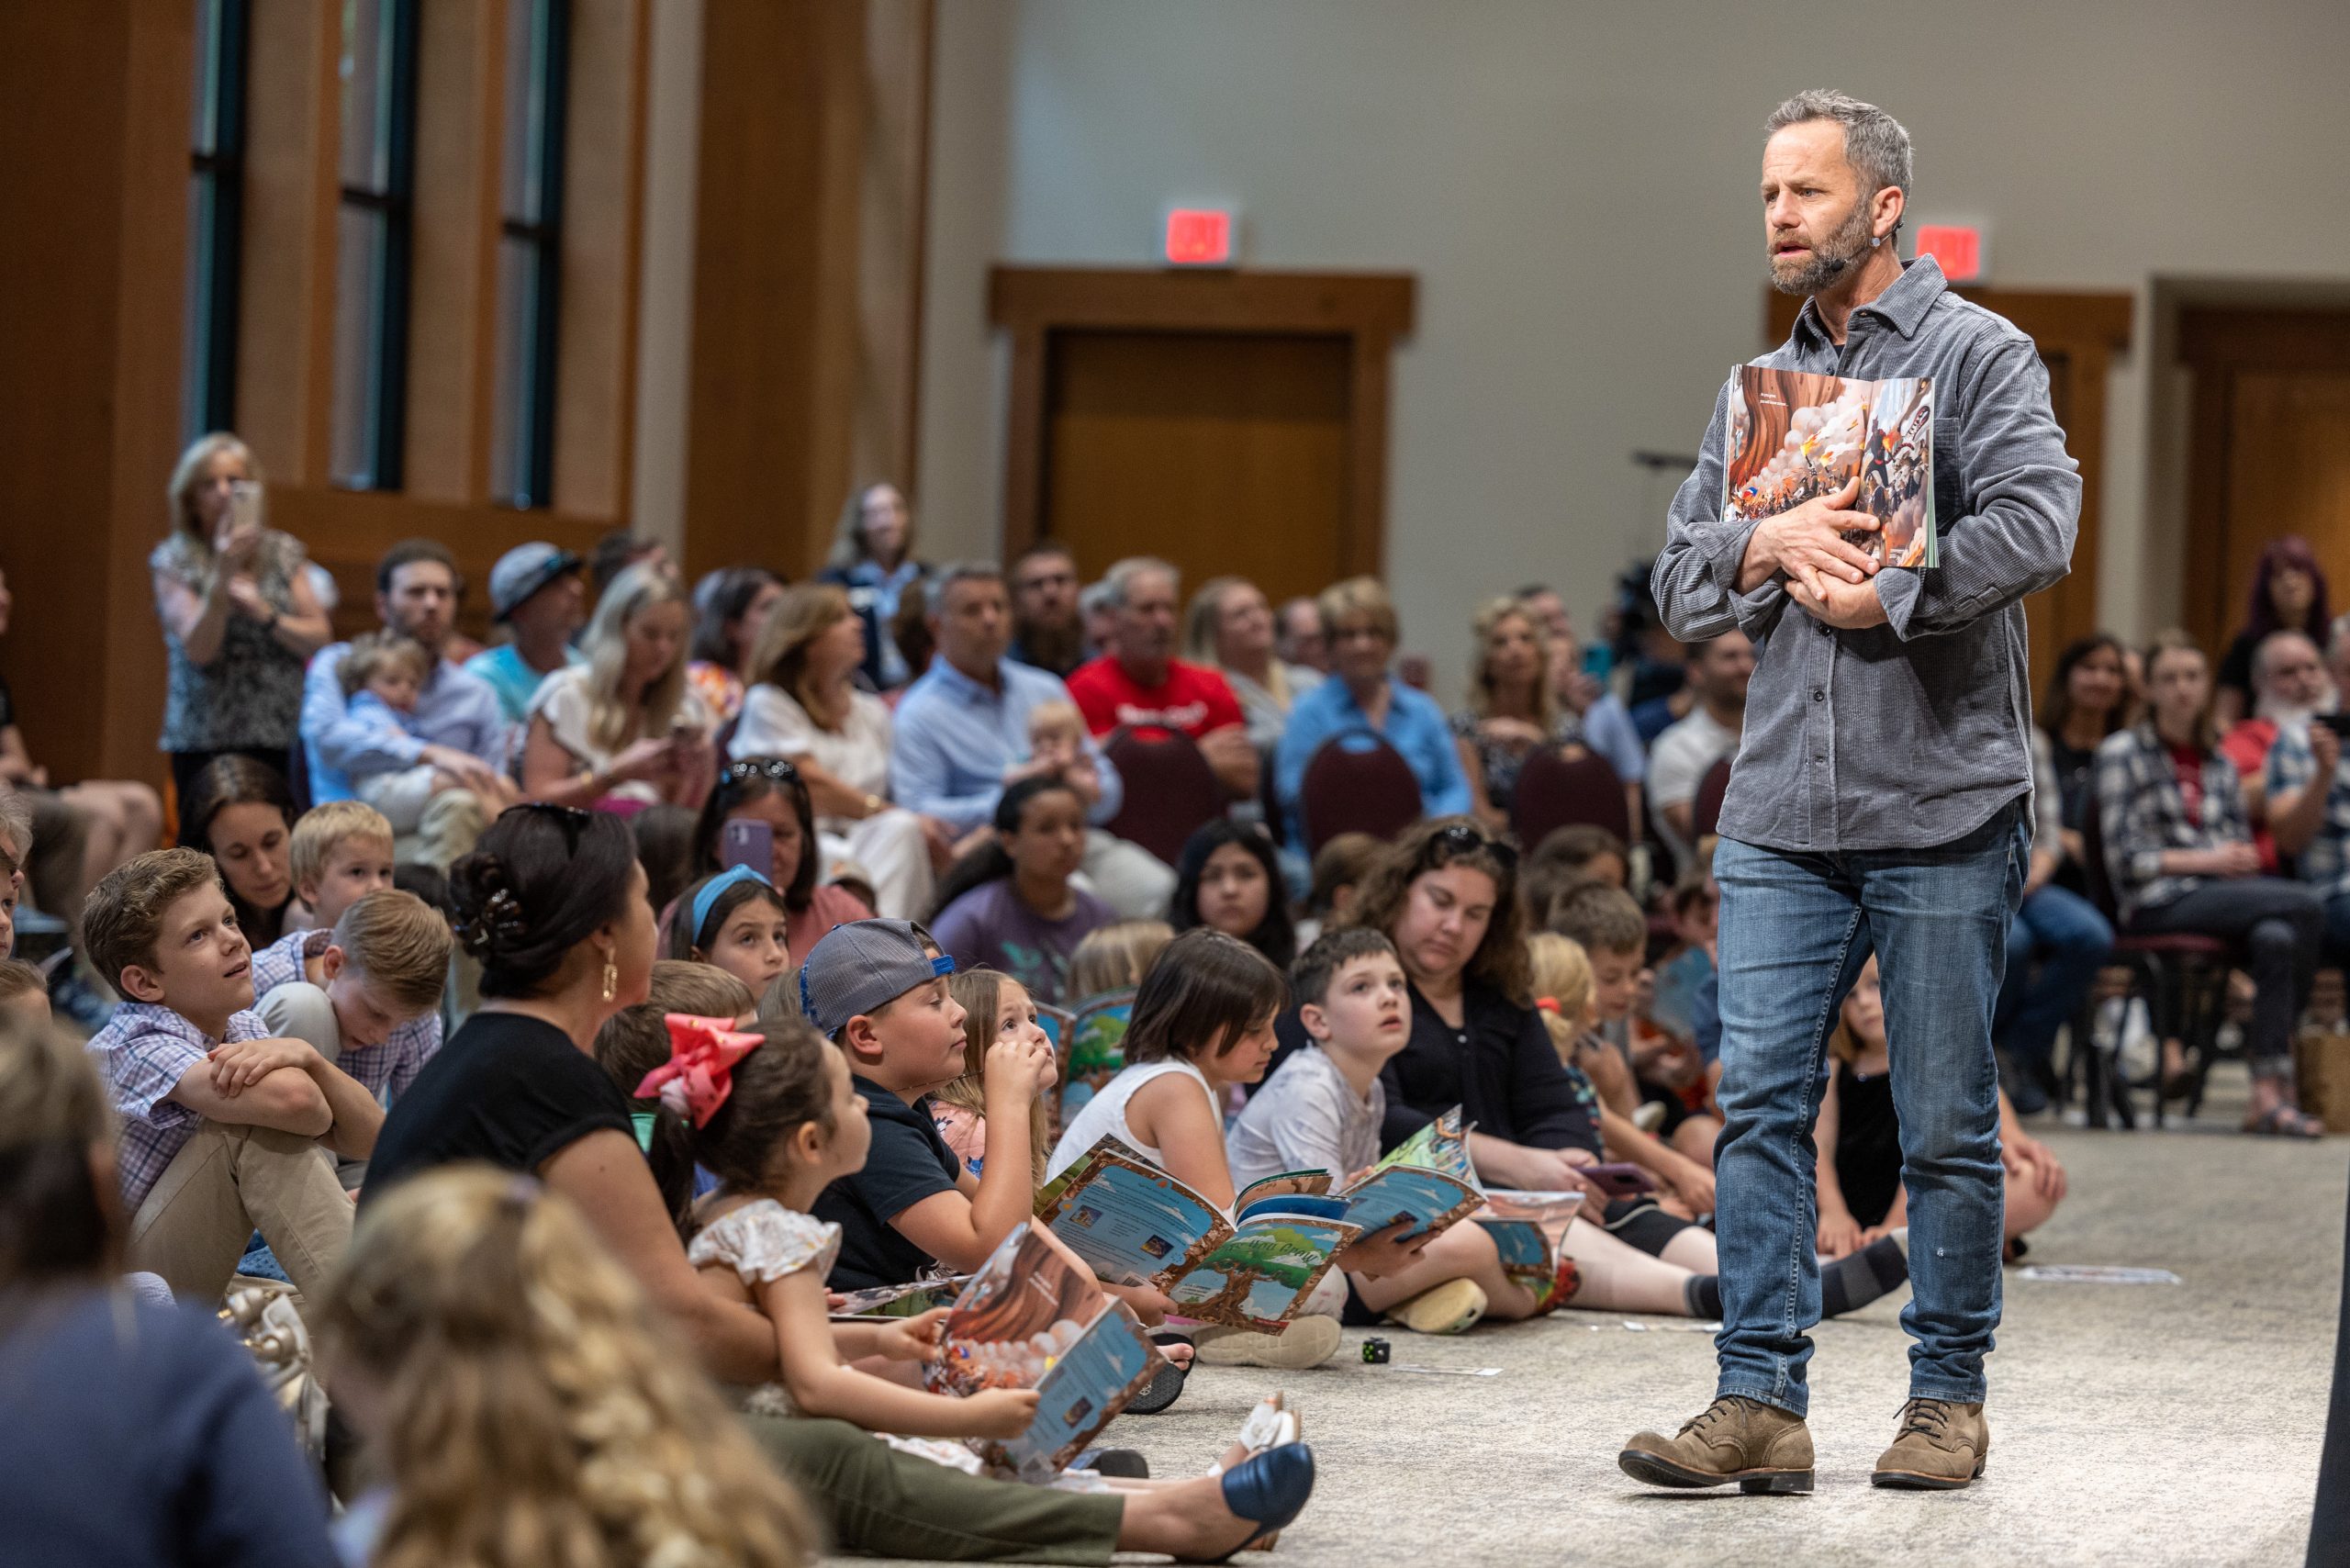 An Afternoon With Kirk Cameron Draws More Than 1,000 to Billy Graham